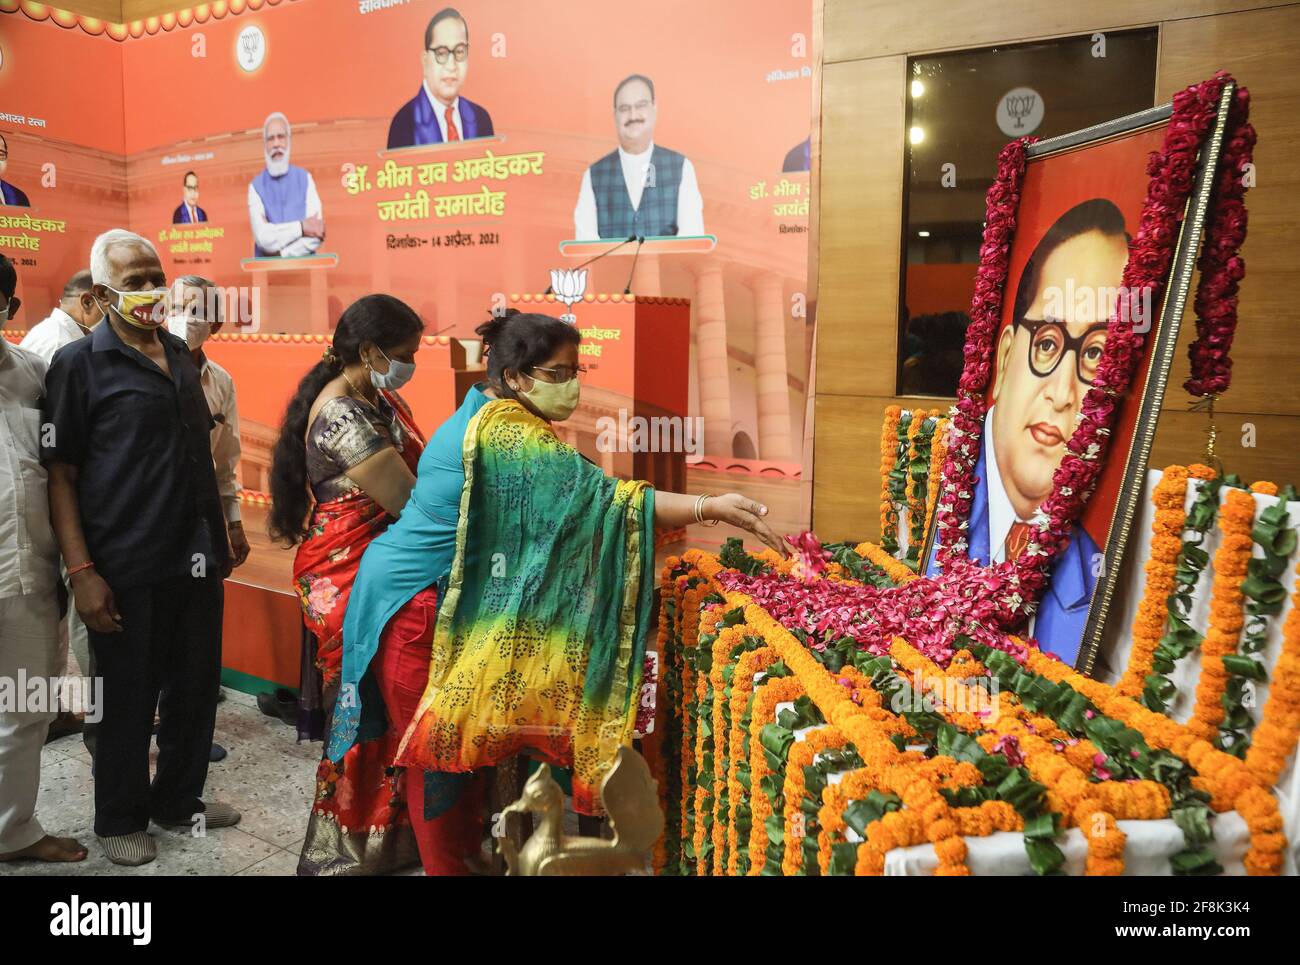 New Delhi, India. 14th Apr, 2021. People pay floral tributes to the portrait of Bharat Ratna Baba Sahab Bhim Rao Ambedkar on his birth anniversary, at BJP party headquarter in New Delhi. The nation is celebrating the 130th birth anniversary of Dr. B.R. Ambedkar, the architect of Indian Constitution. He campaigned against social discrimination towards the untouchables (Dalits), all his life he worked for the welfare of the poor. Credit: SOPA Images Limited/Alamy Live News Stock Photo